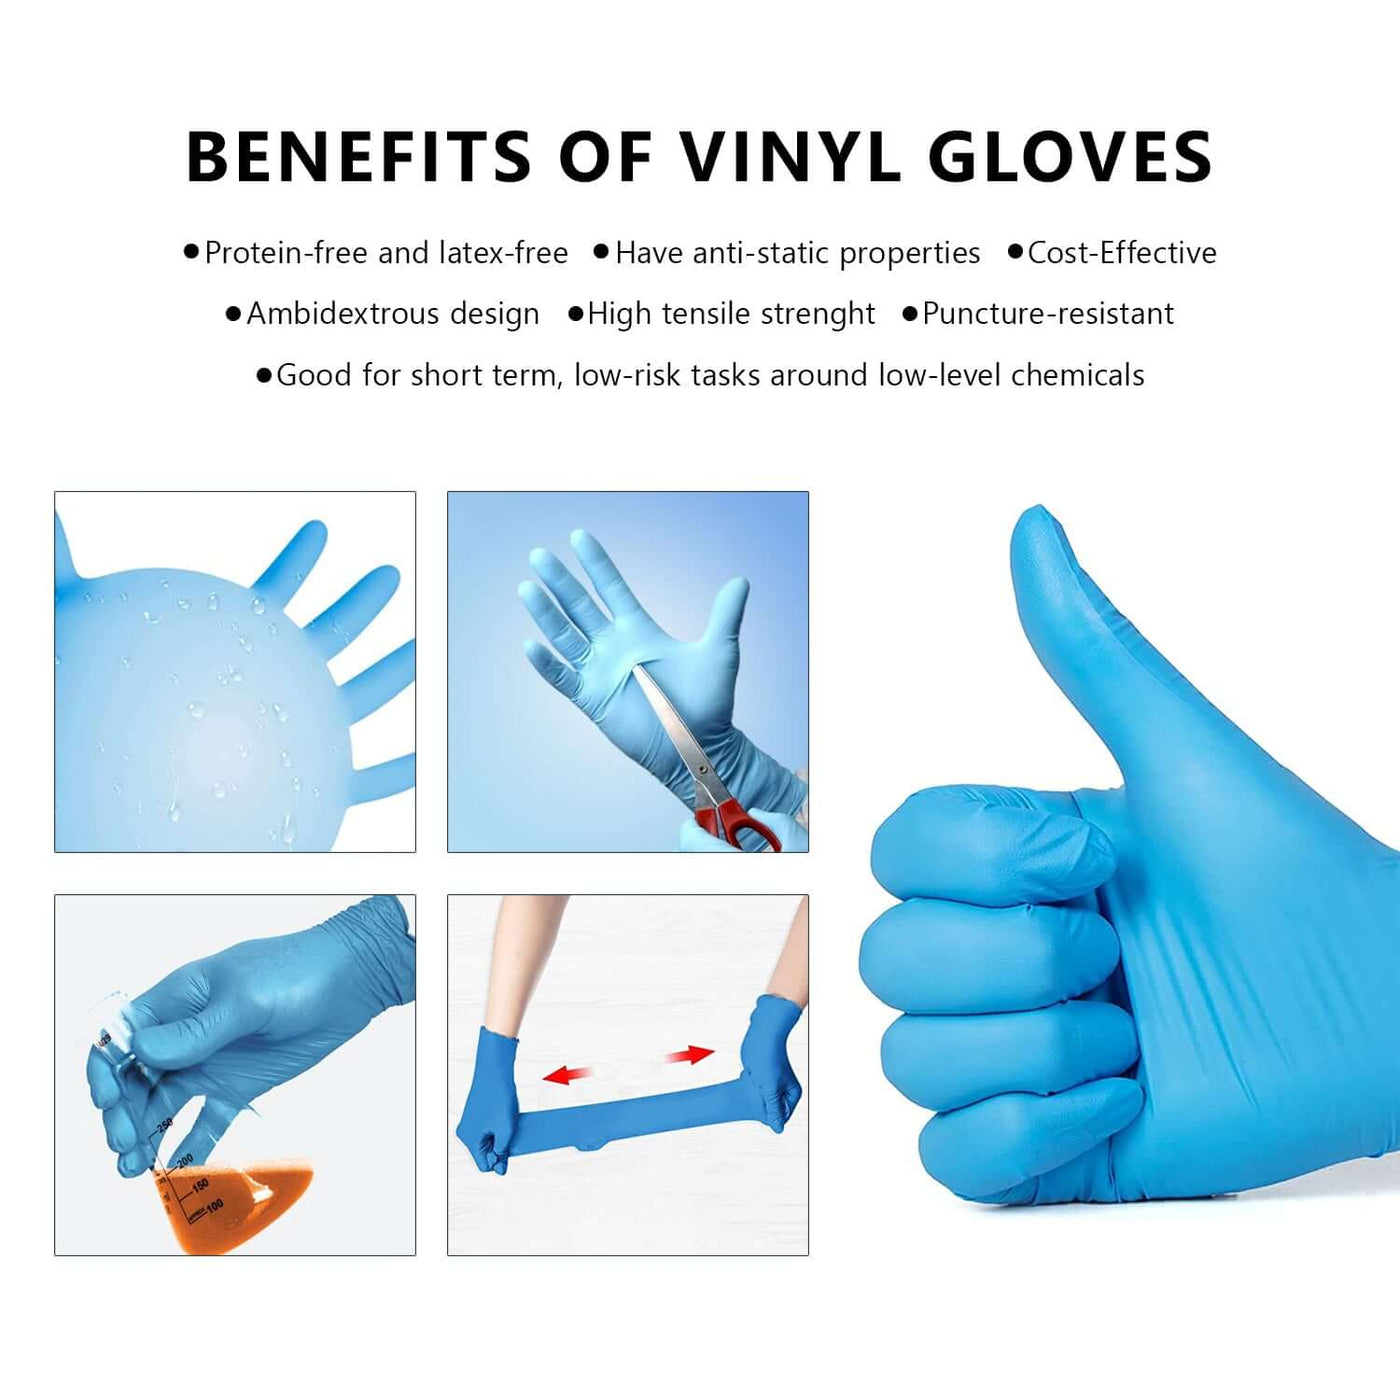 Blue Vinyl Gloves, Pack of 100, CE & EU Certified, Powder & Latex Free, Two-Handed, Multi-Purpose Disposable Gloves, Extra Strong, For home, kitchen, catering, restaurant. (6838757163107)